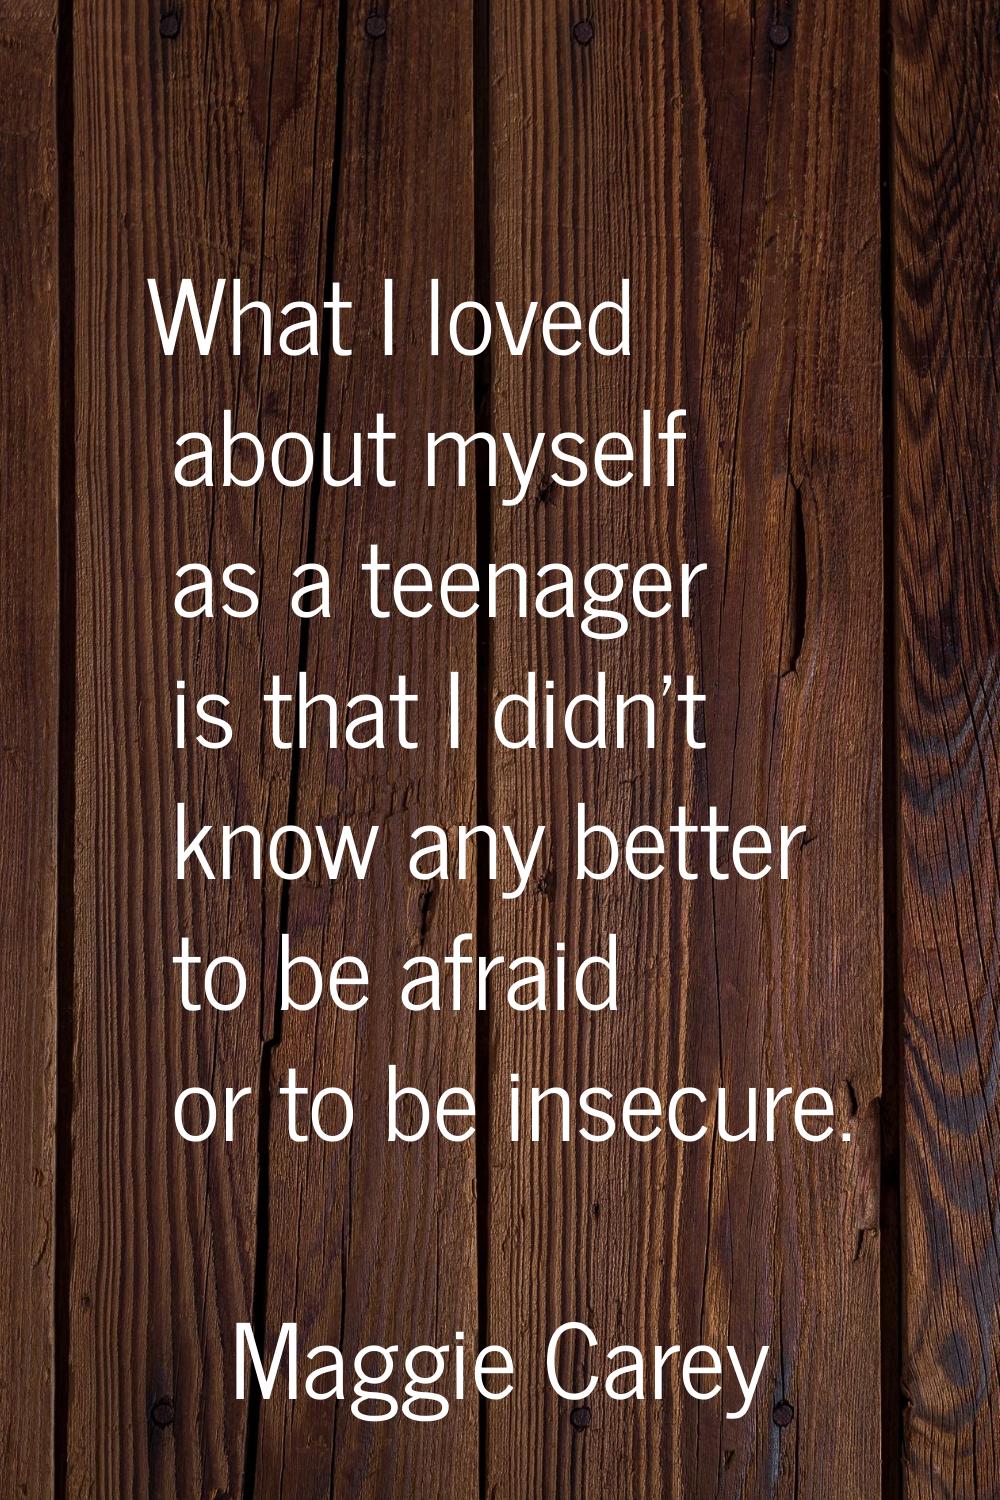 What I loved about myself as a teenager is that I didn't know any better to be afraid or to be inse